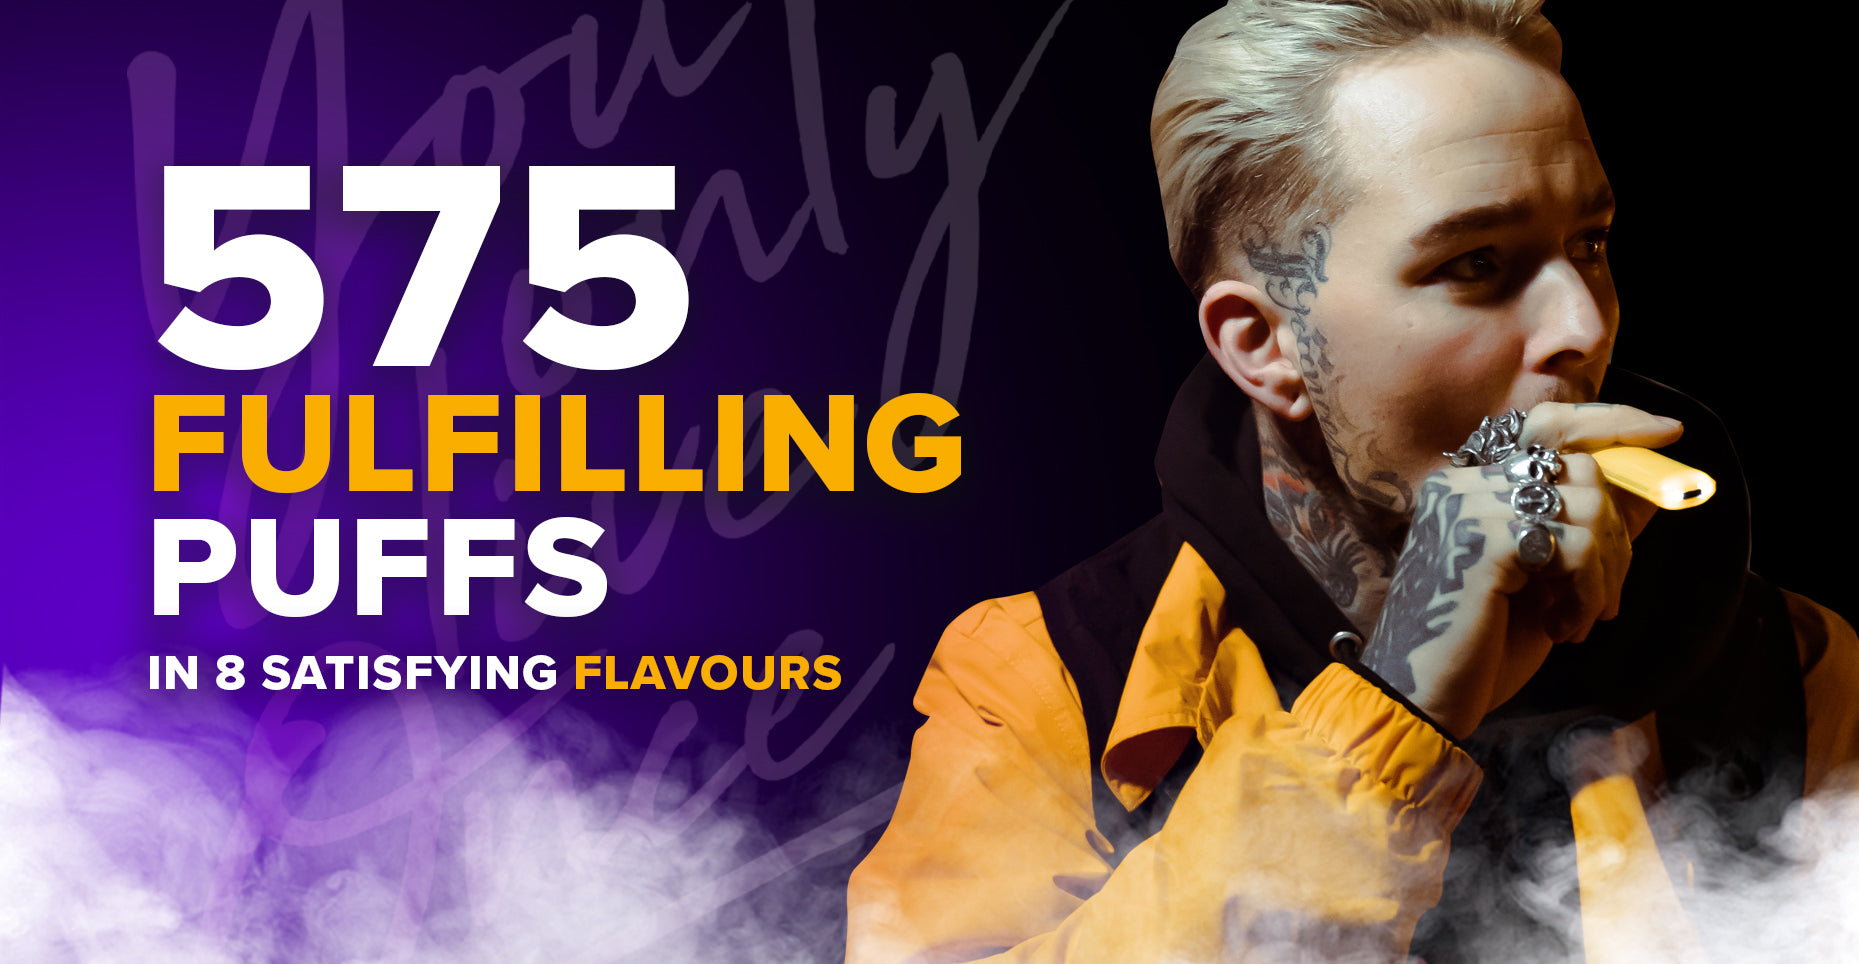 3. Yolo Disposable Vape Device 575 Fulfilling Puffs In Satisfying Flavours